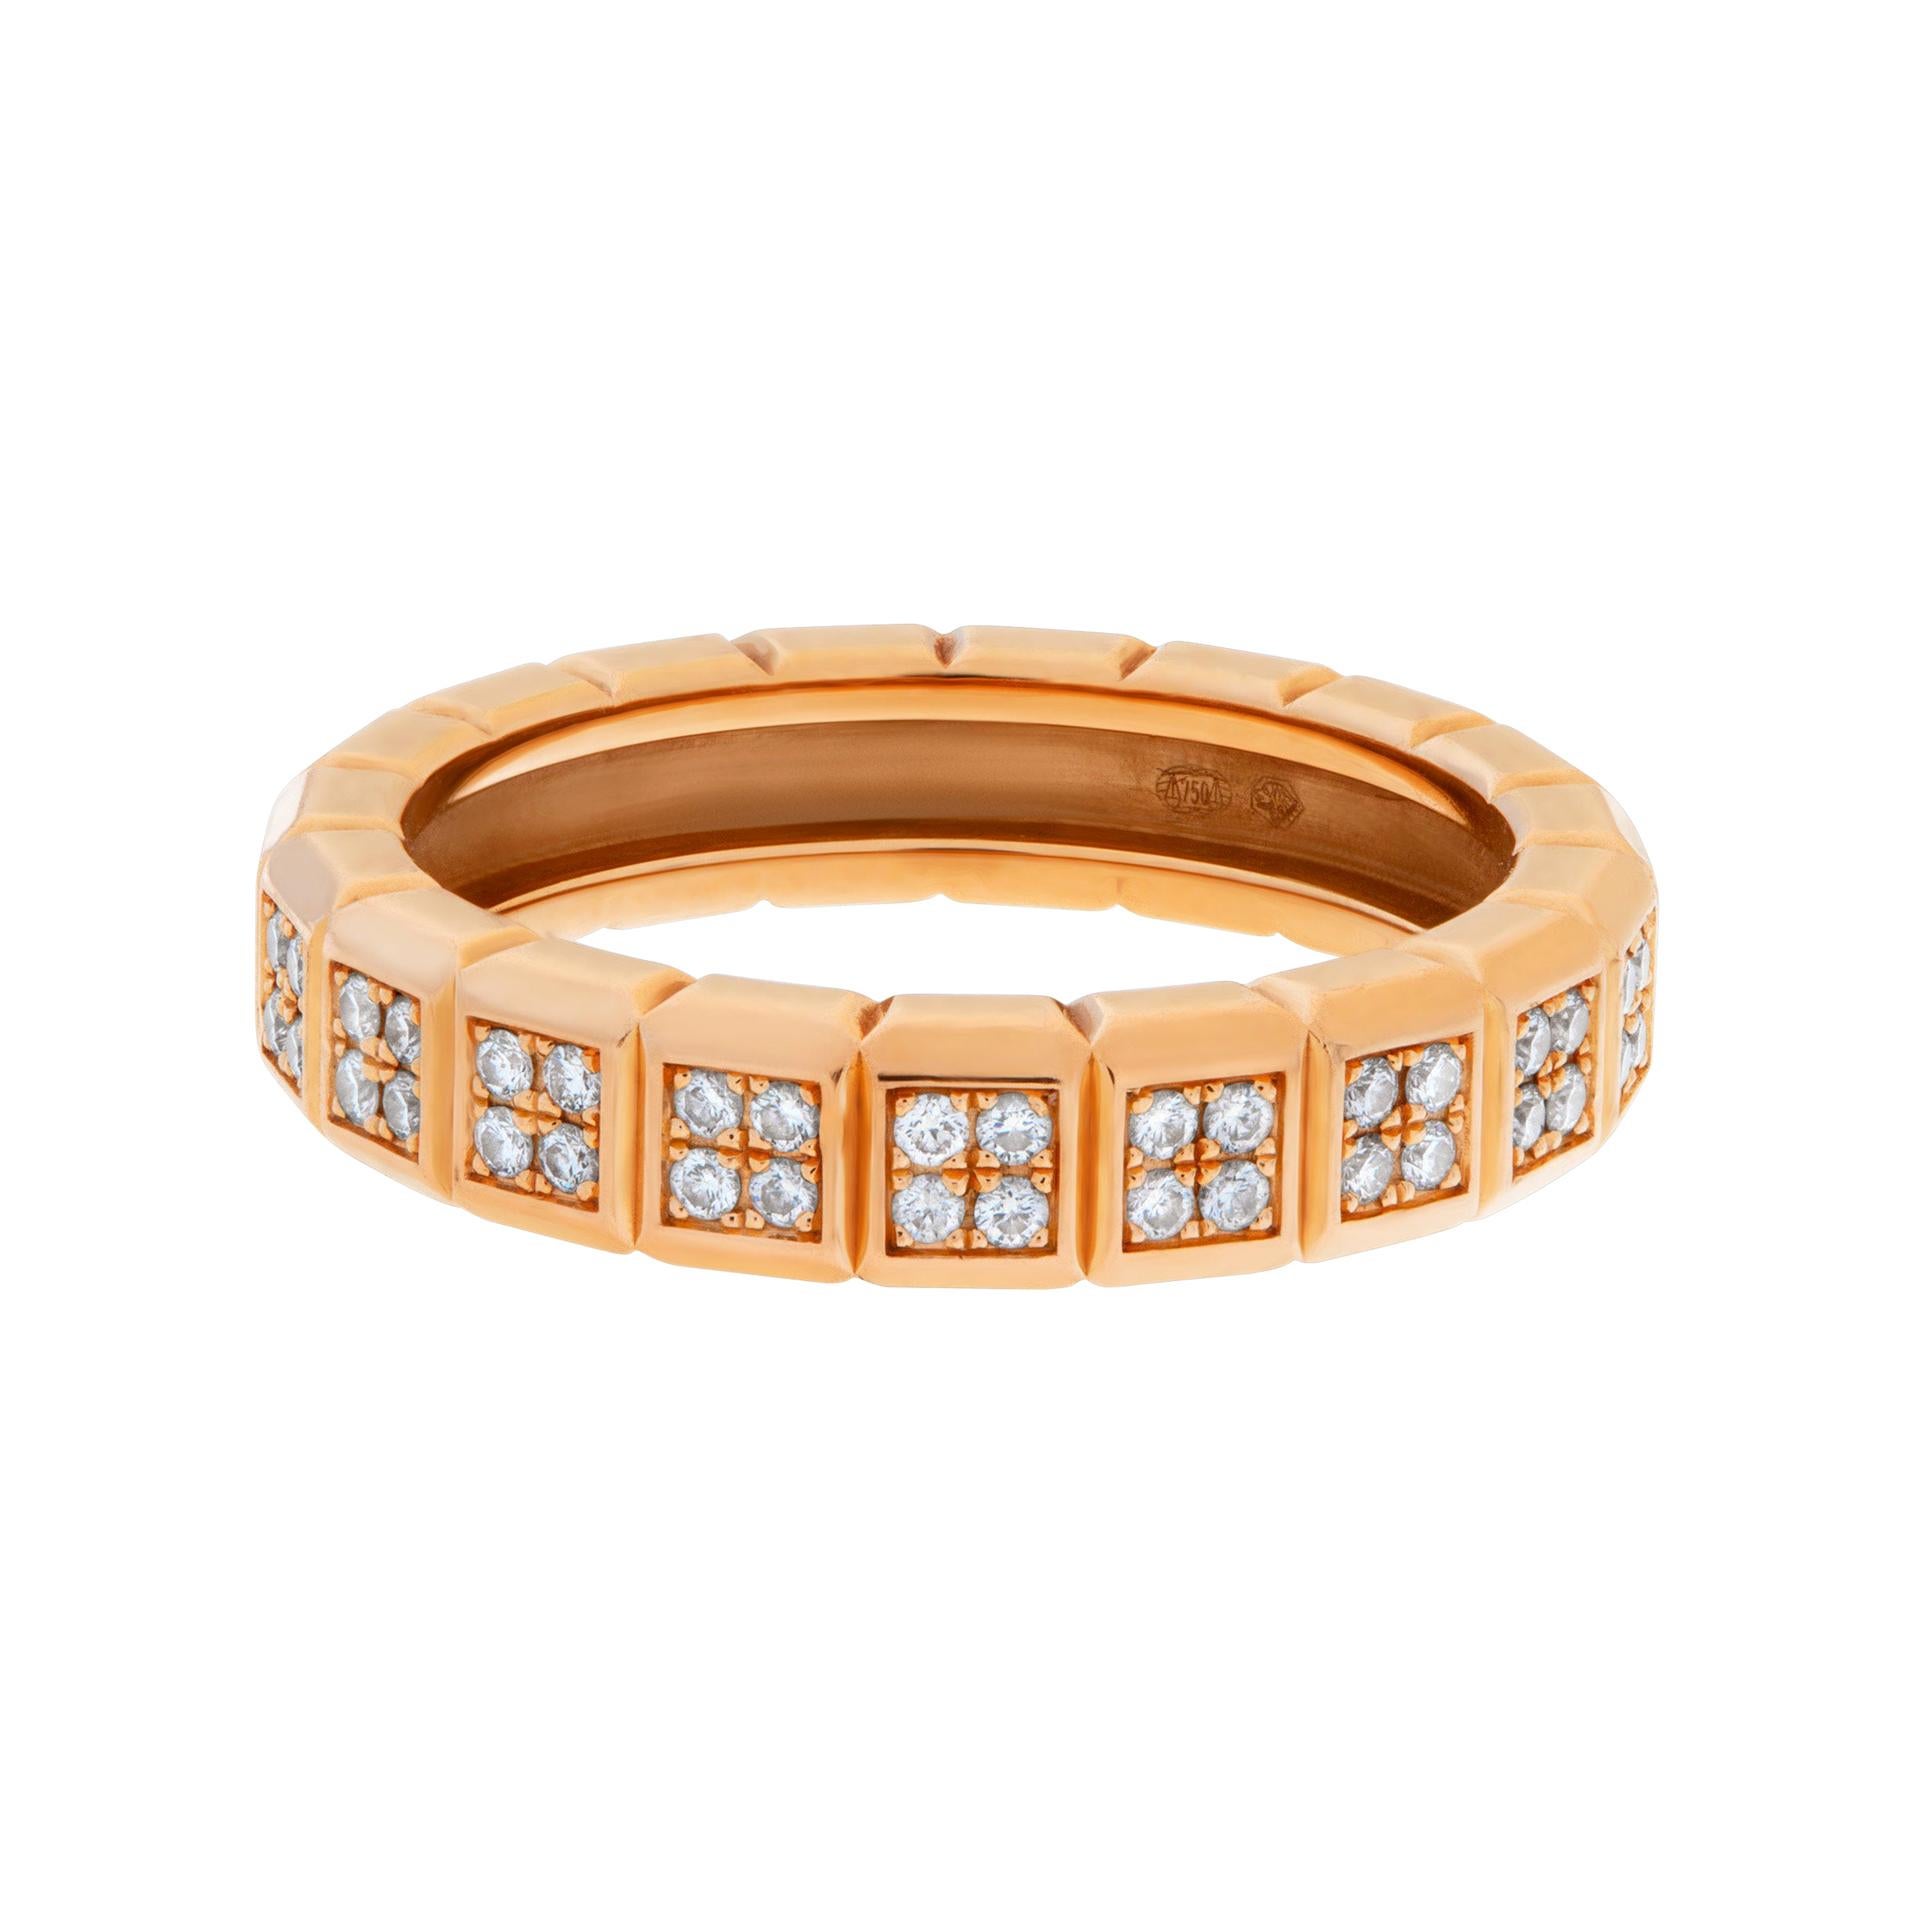 Chopard "Ice Cube Pure" Eternity Ring in 18k Rose Gold with Diamonds